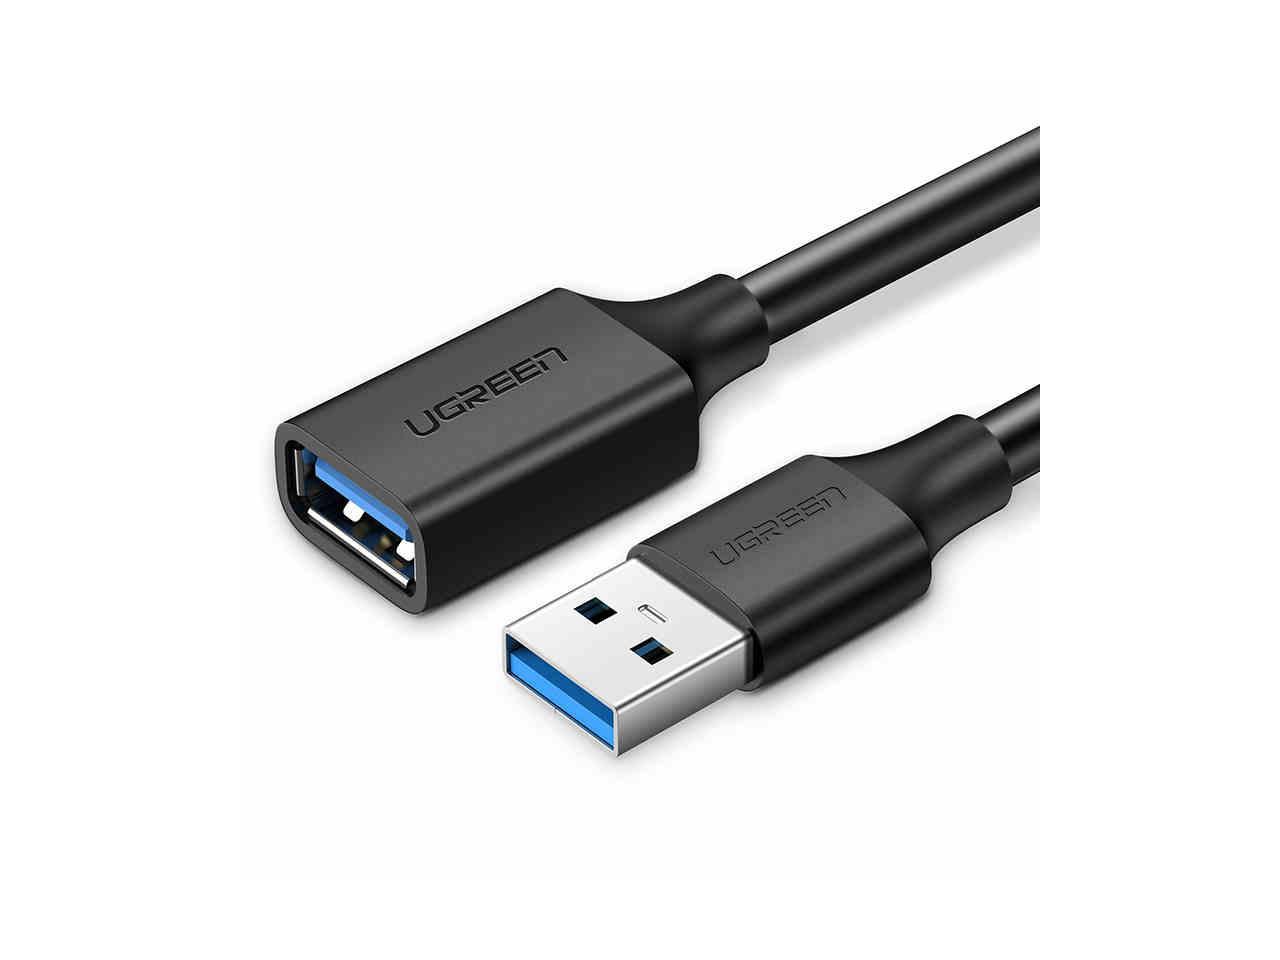 LYY USB Extension Cable USB 3.0 Cable Suitable for TV PS4 SSD 5GB USB3.0 Extender Data Cord Male to Female USB Extension Cable 